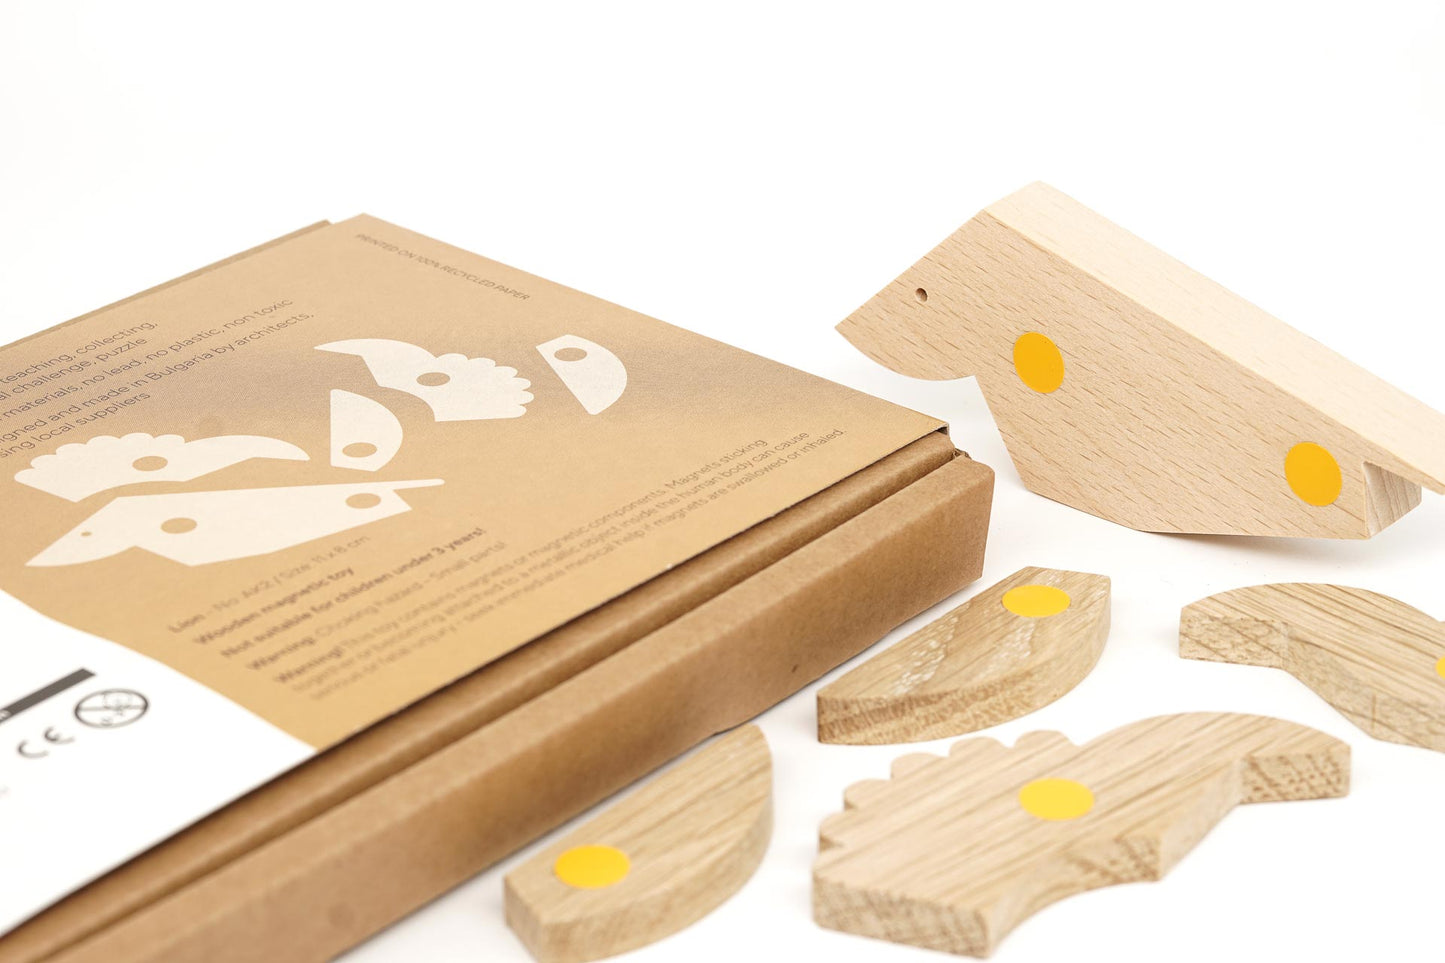 Assemble a magentic wooden toy lion using various parts by connecting the dots.